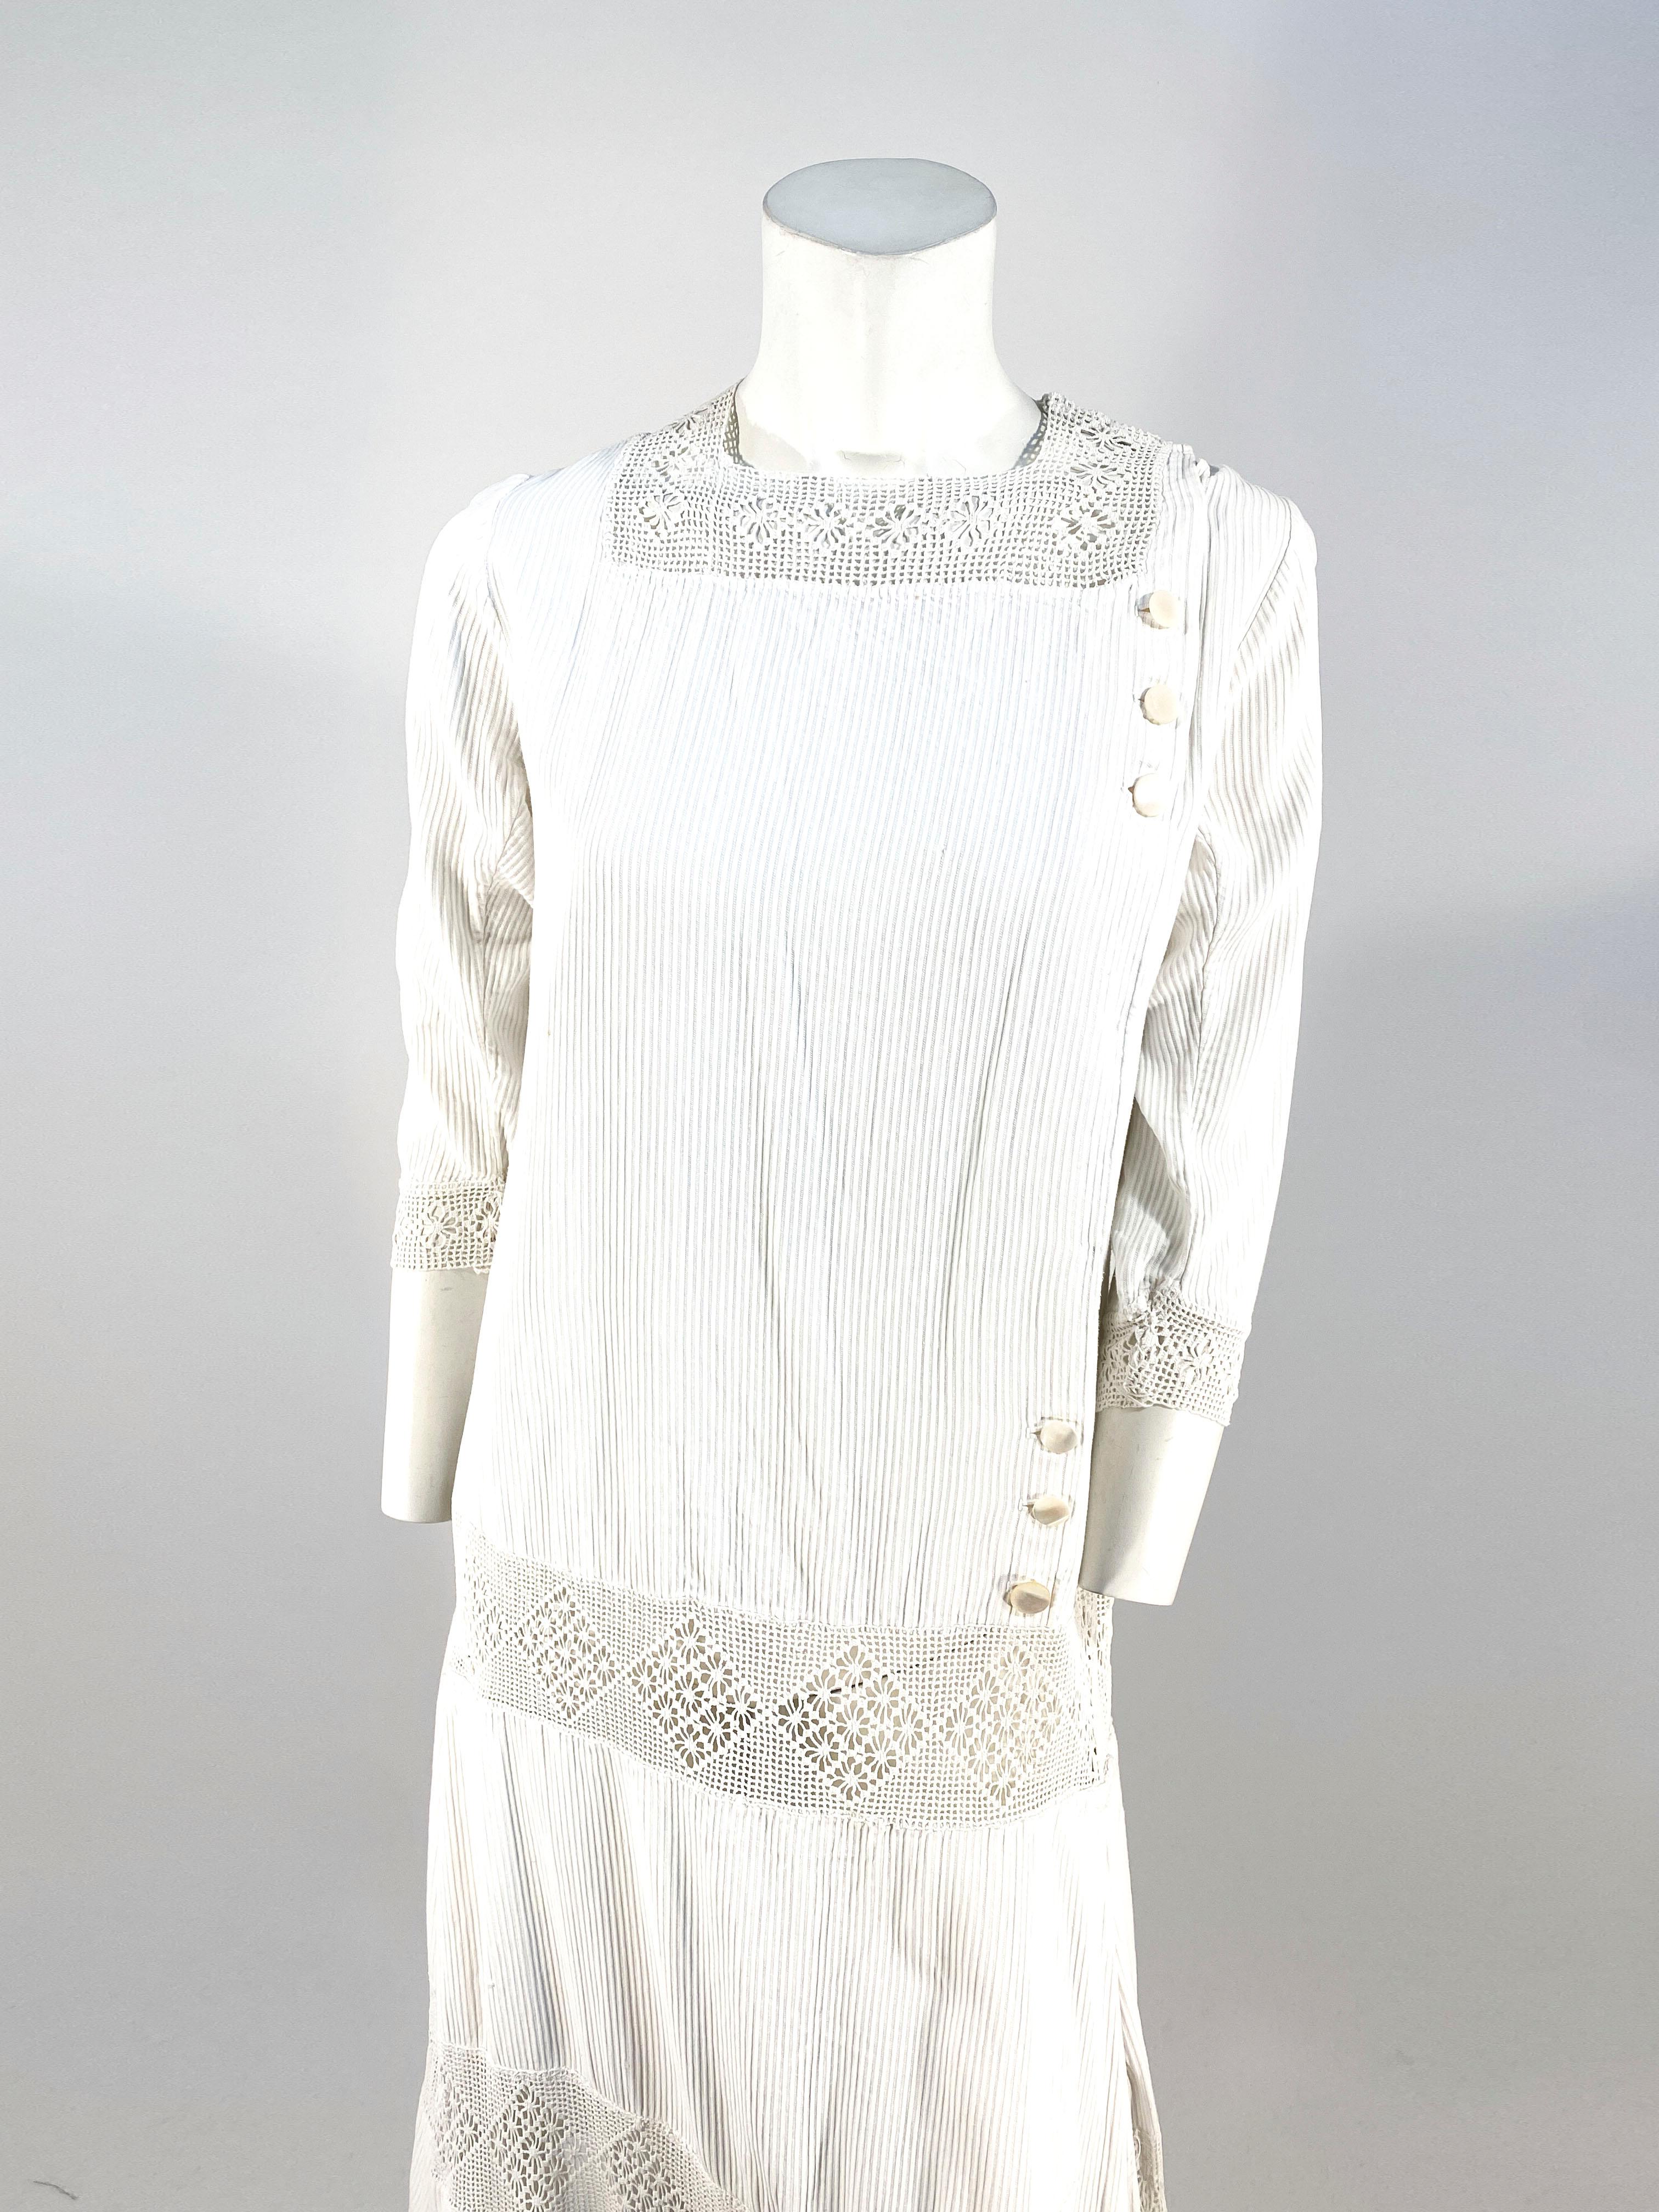 1920s white ribbed cotton day dress featuring a dropped waist band of hand crochet border that corresponds with the crochet on the elbow cuffs, skirt border, and square neckline. The asymmetrical front closure is finished with six seashell buttons.